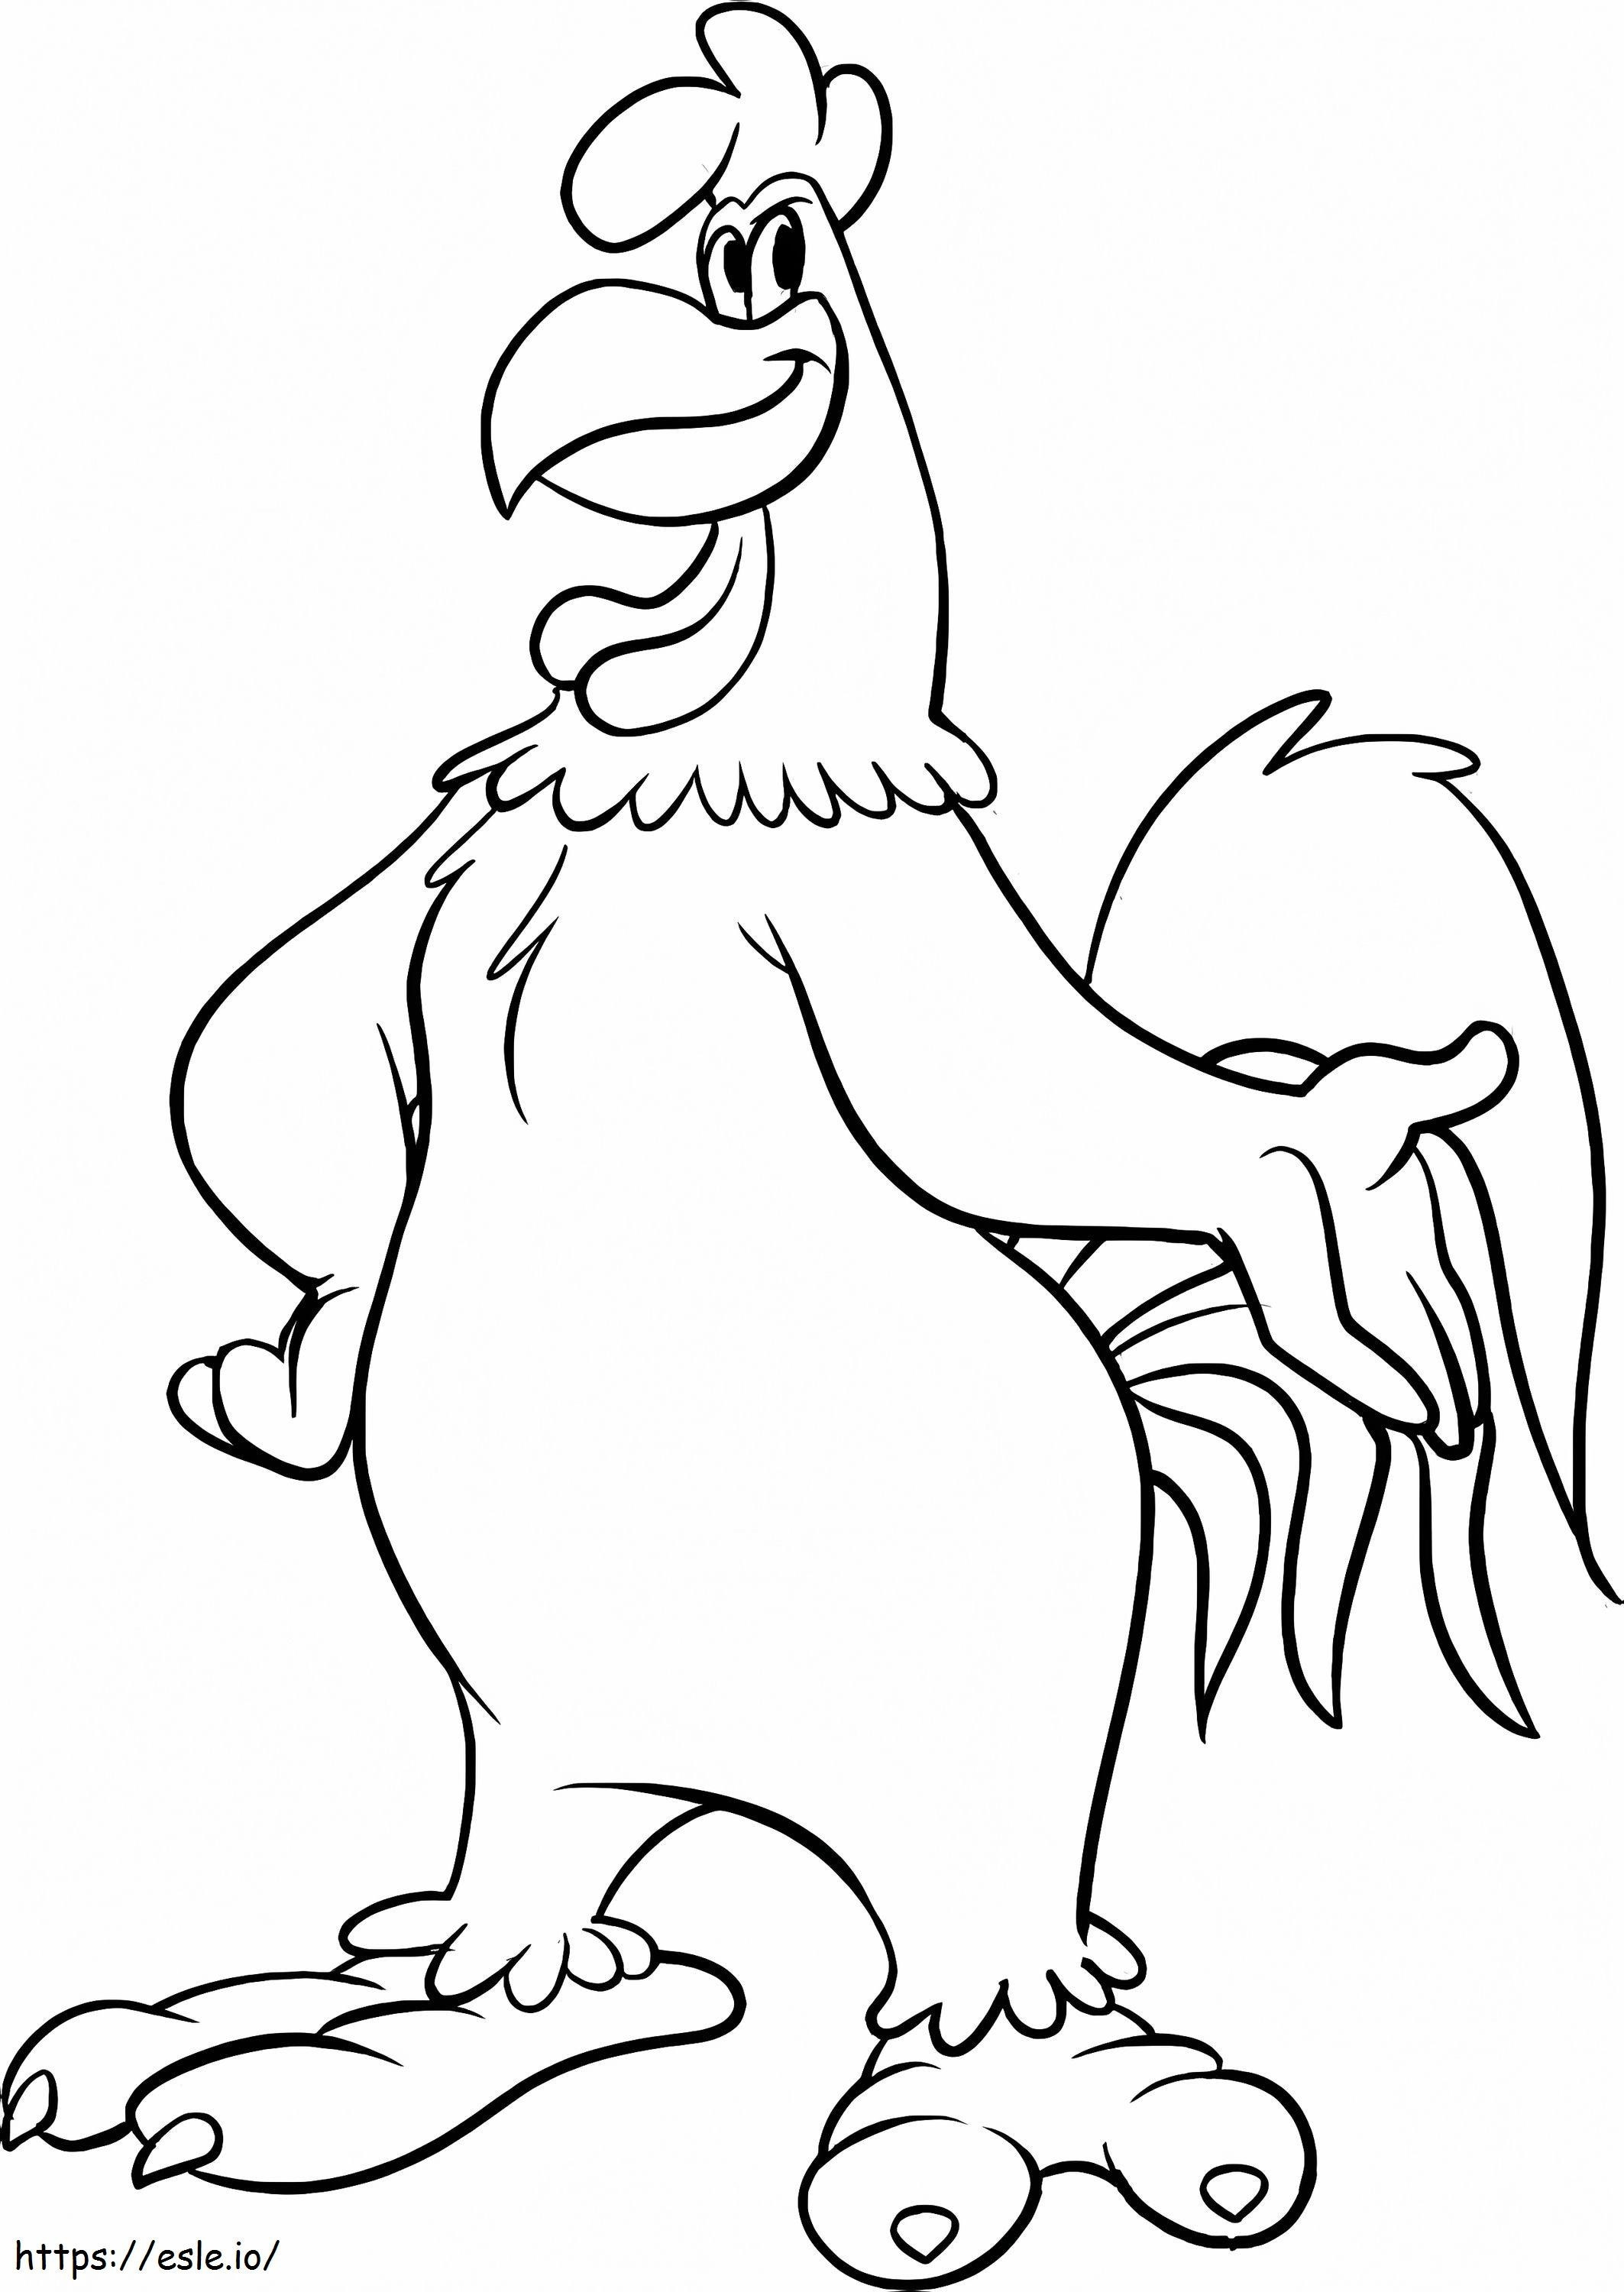 Foghorn Leghorn 4 coloring page